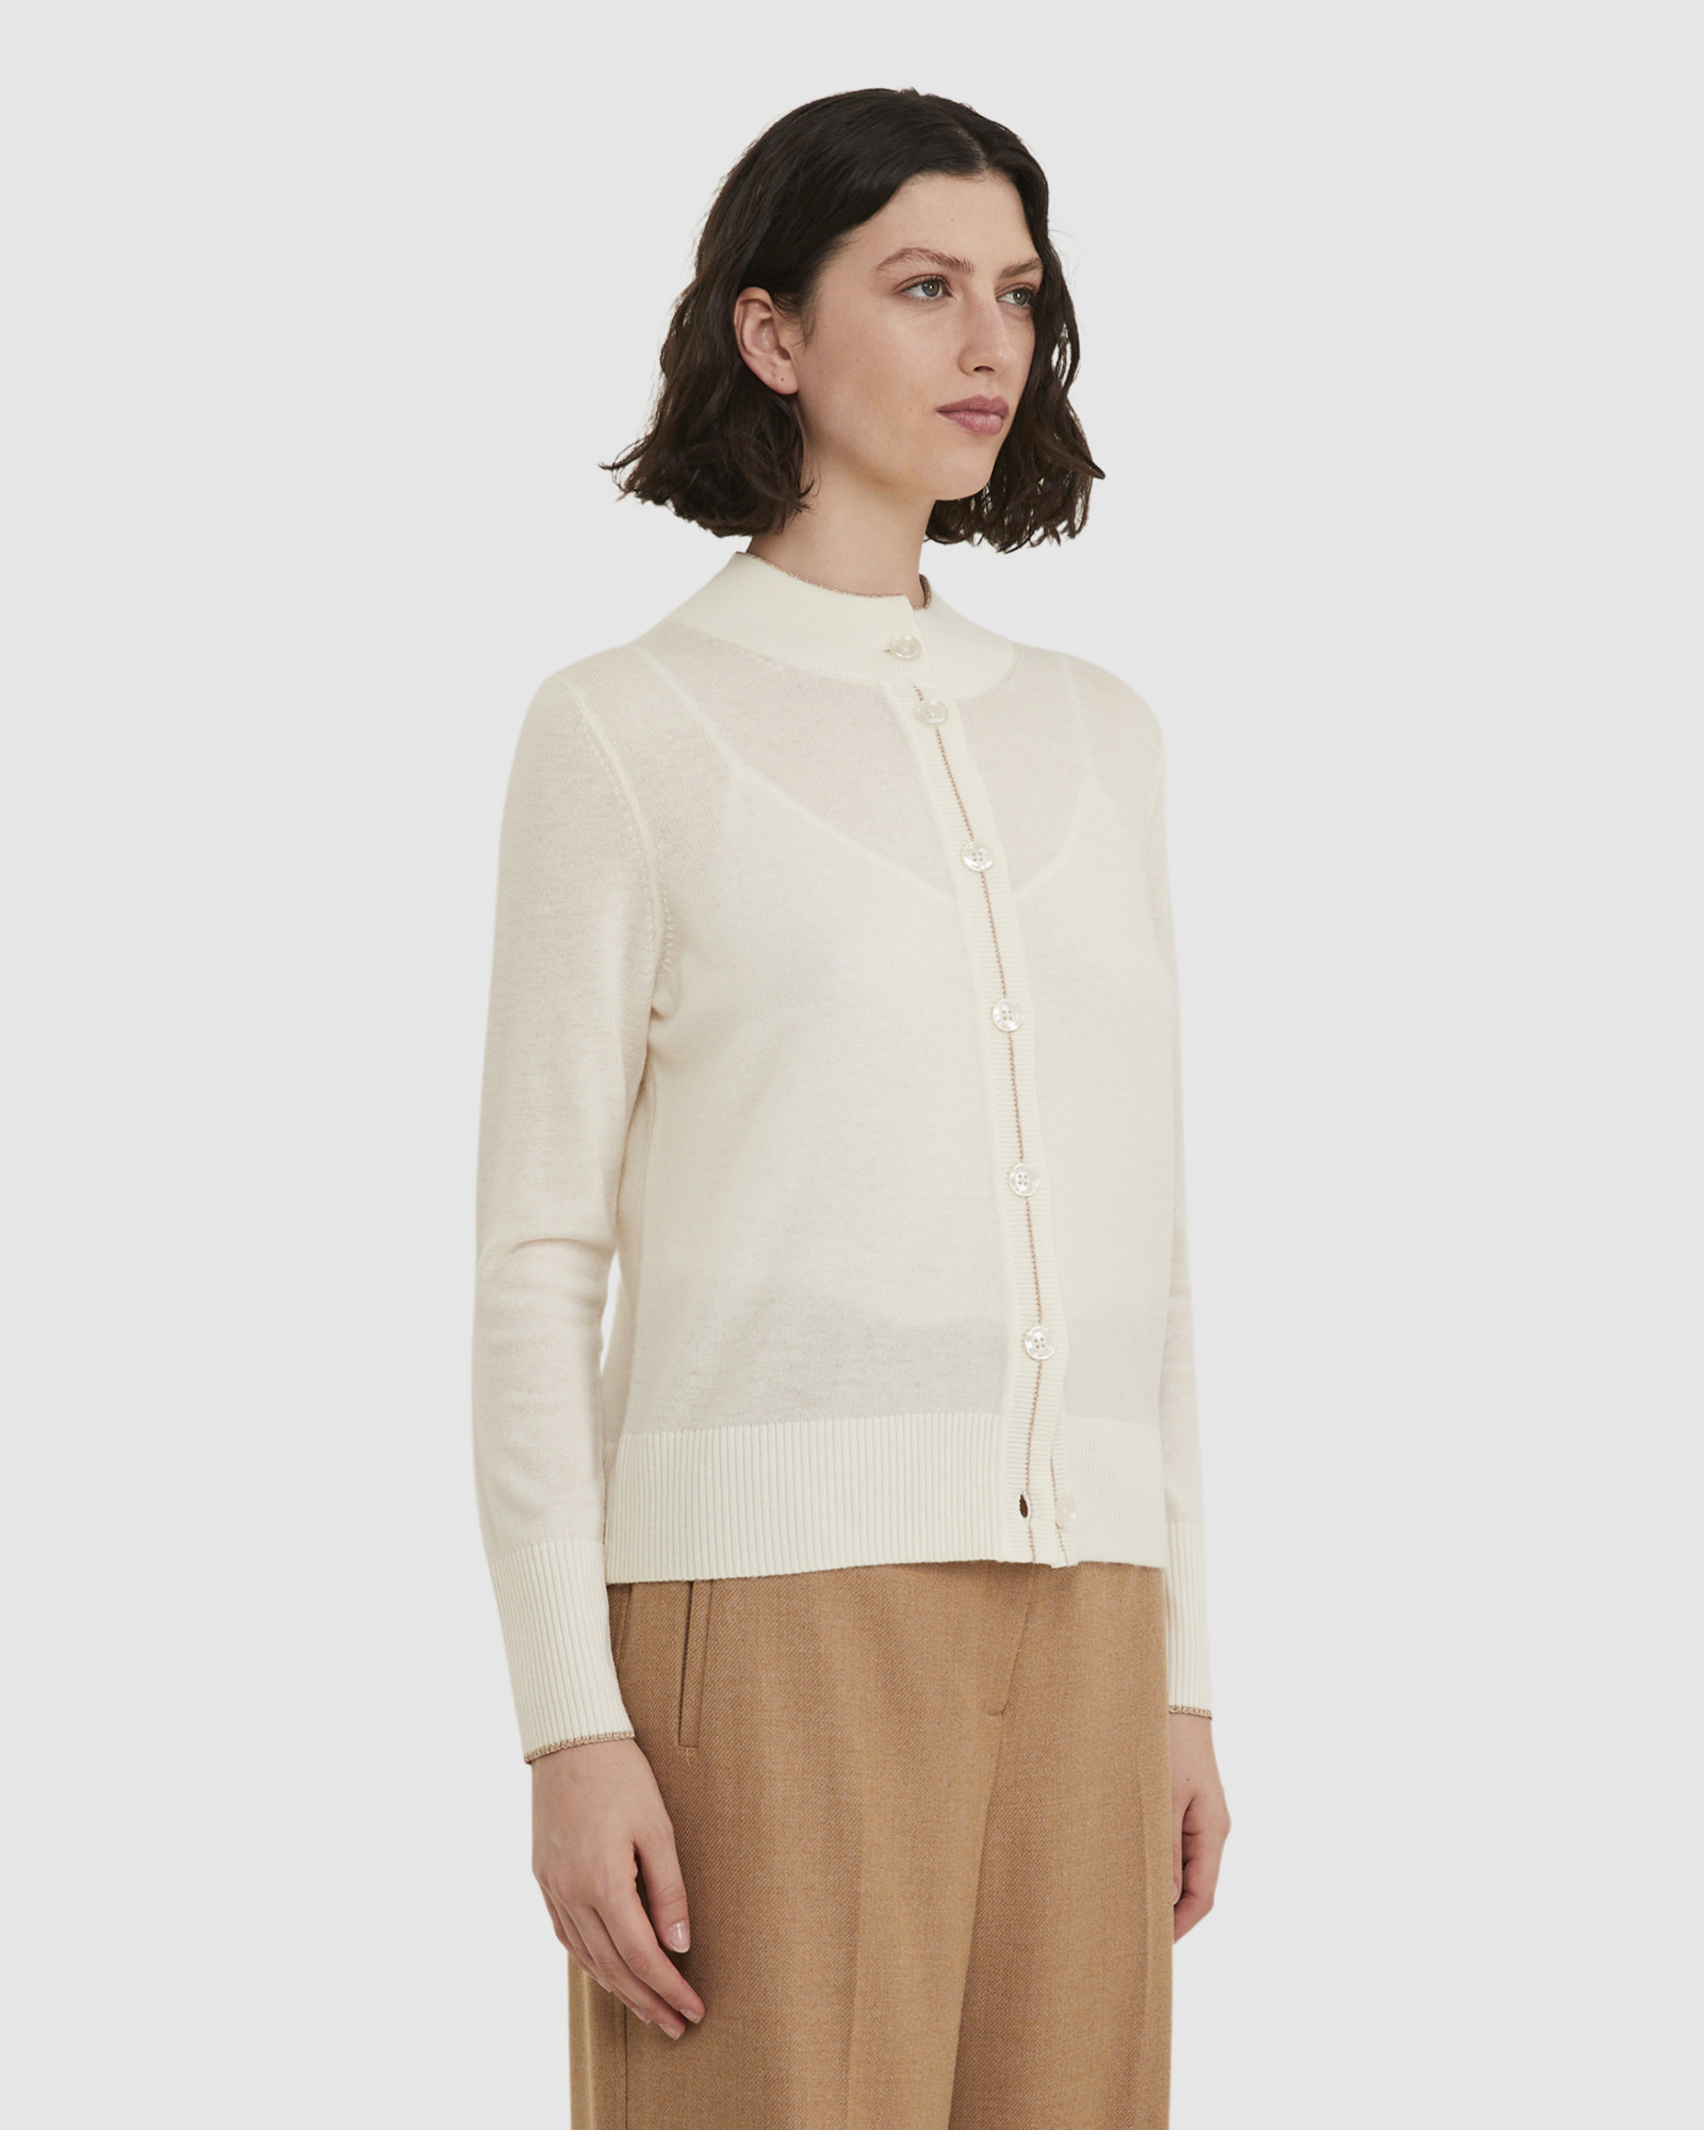 Better Dressing Cardigan in IVORY